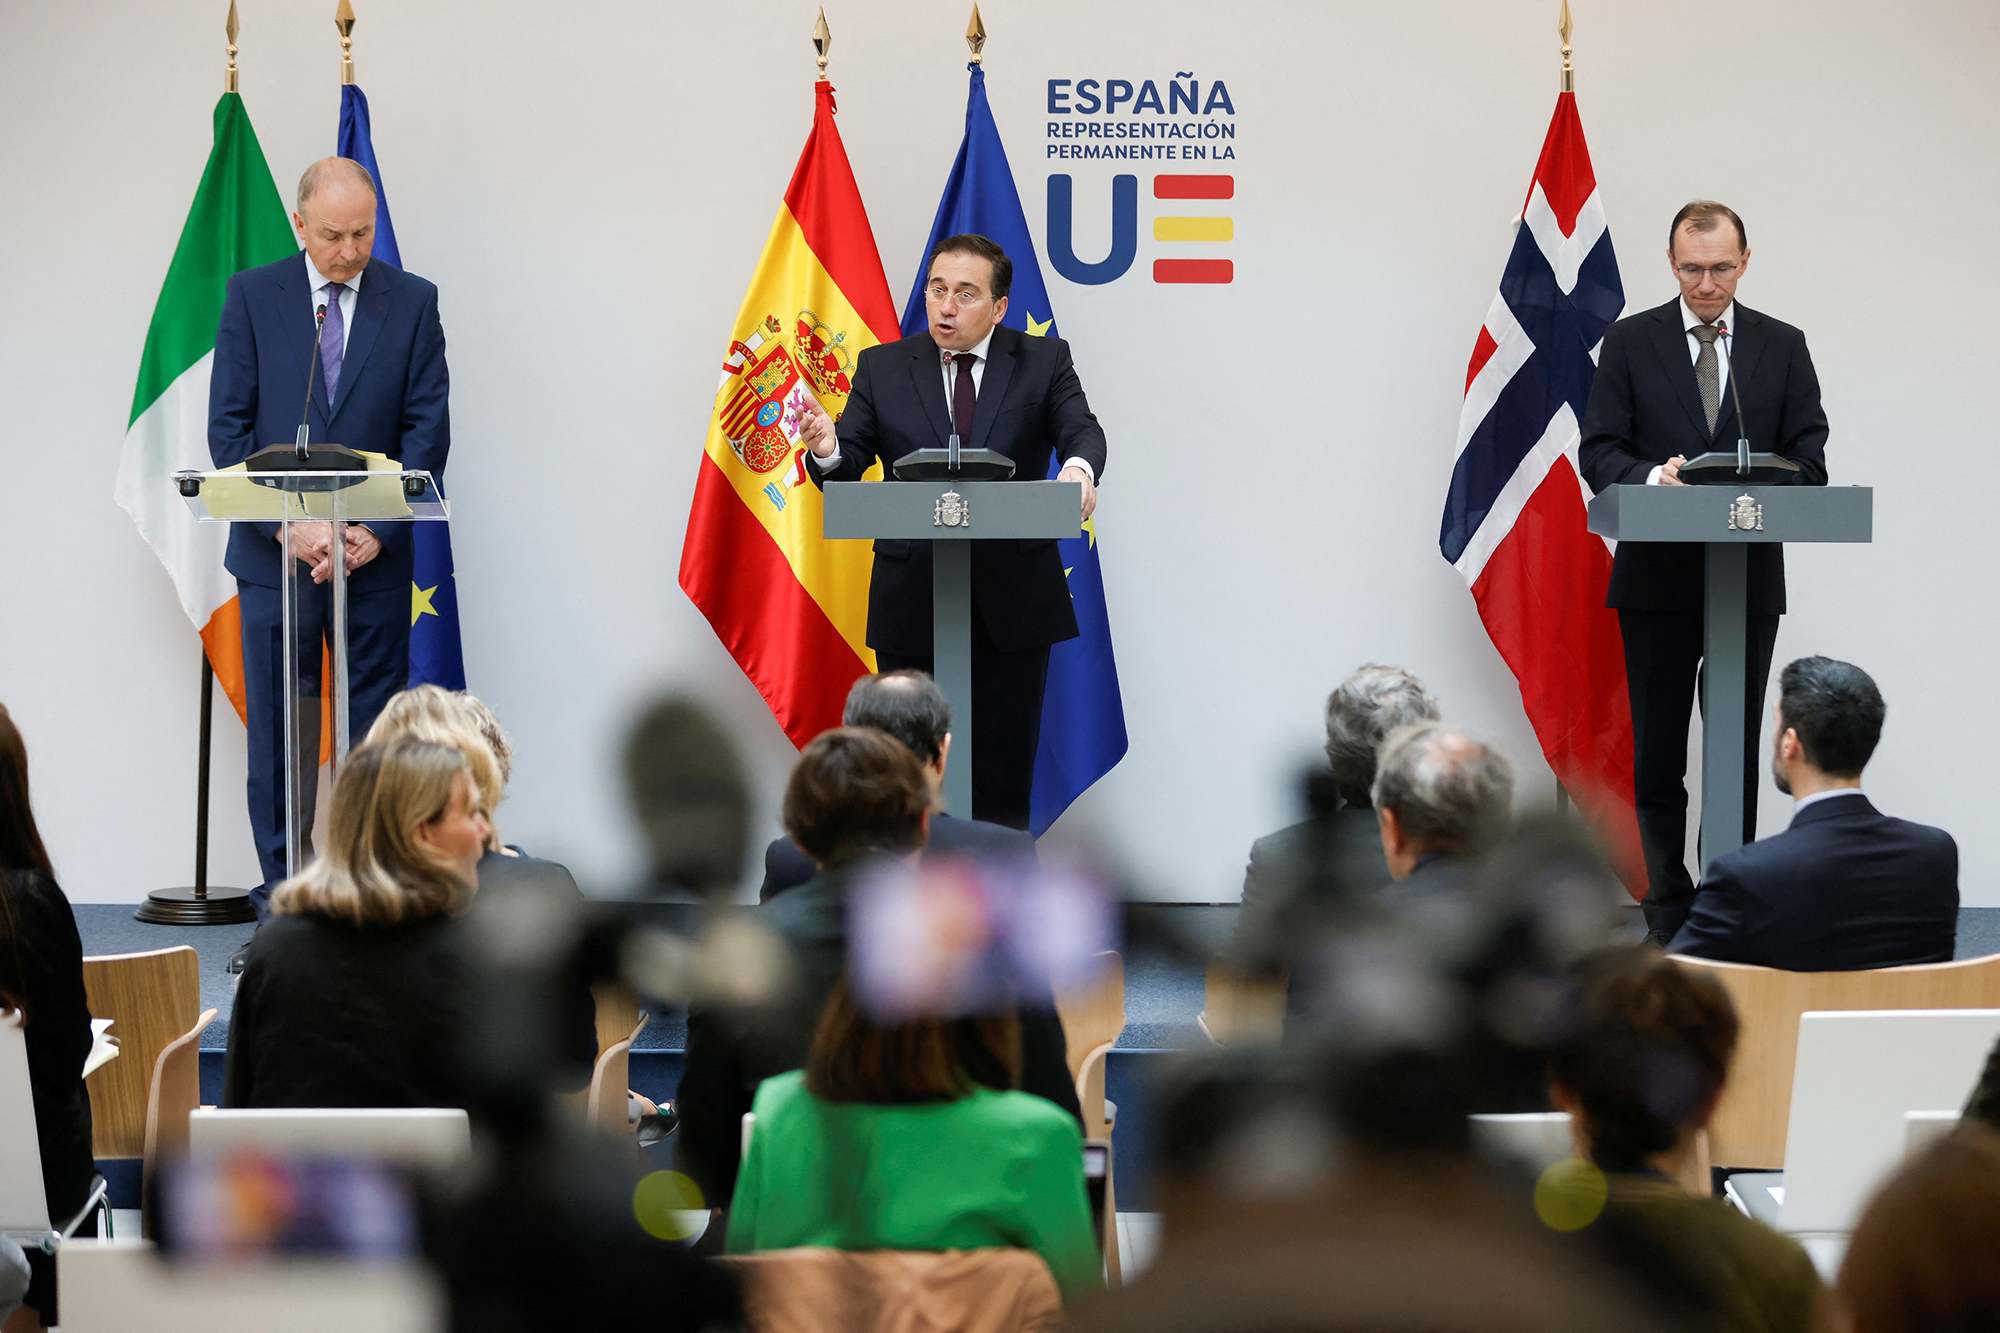 Spanish Foreign Minister Jose Manuel Albares, center, Norway's Foreign Minister Espen Barth Eide, right,  and Ireland's Foreign Minister Micheal Martin hold a press conference in Brussels, Belgium, on May 27.